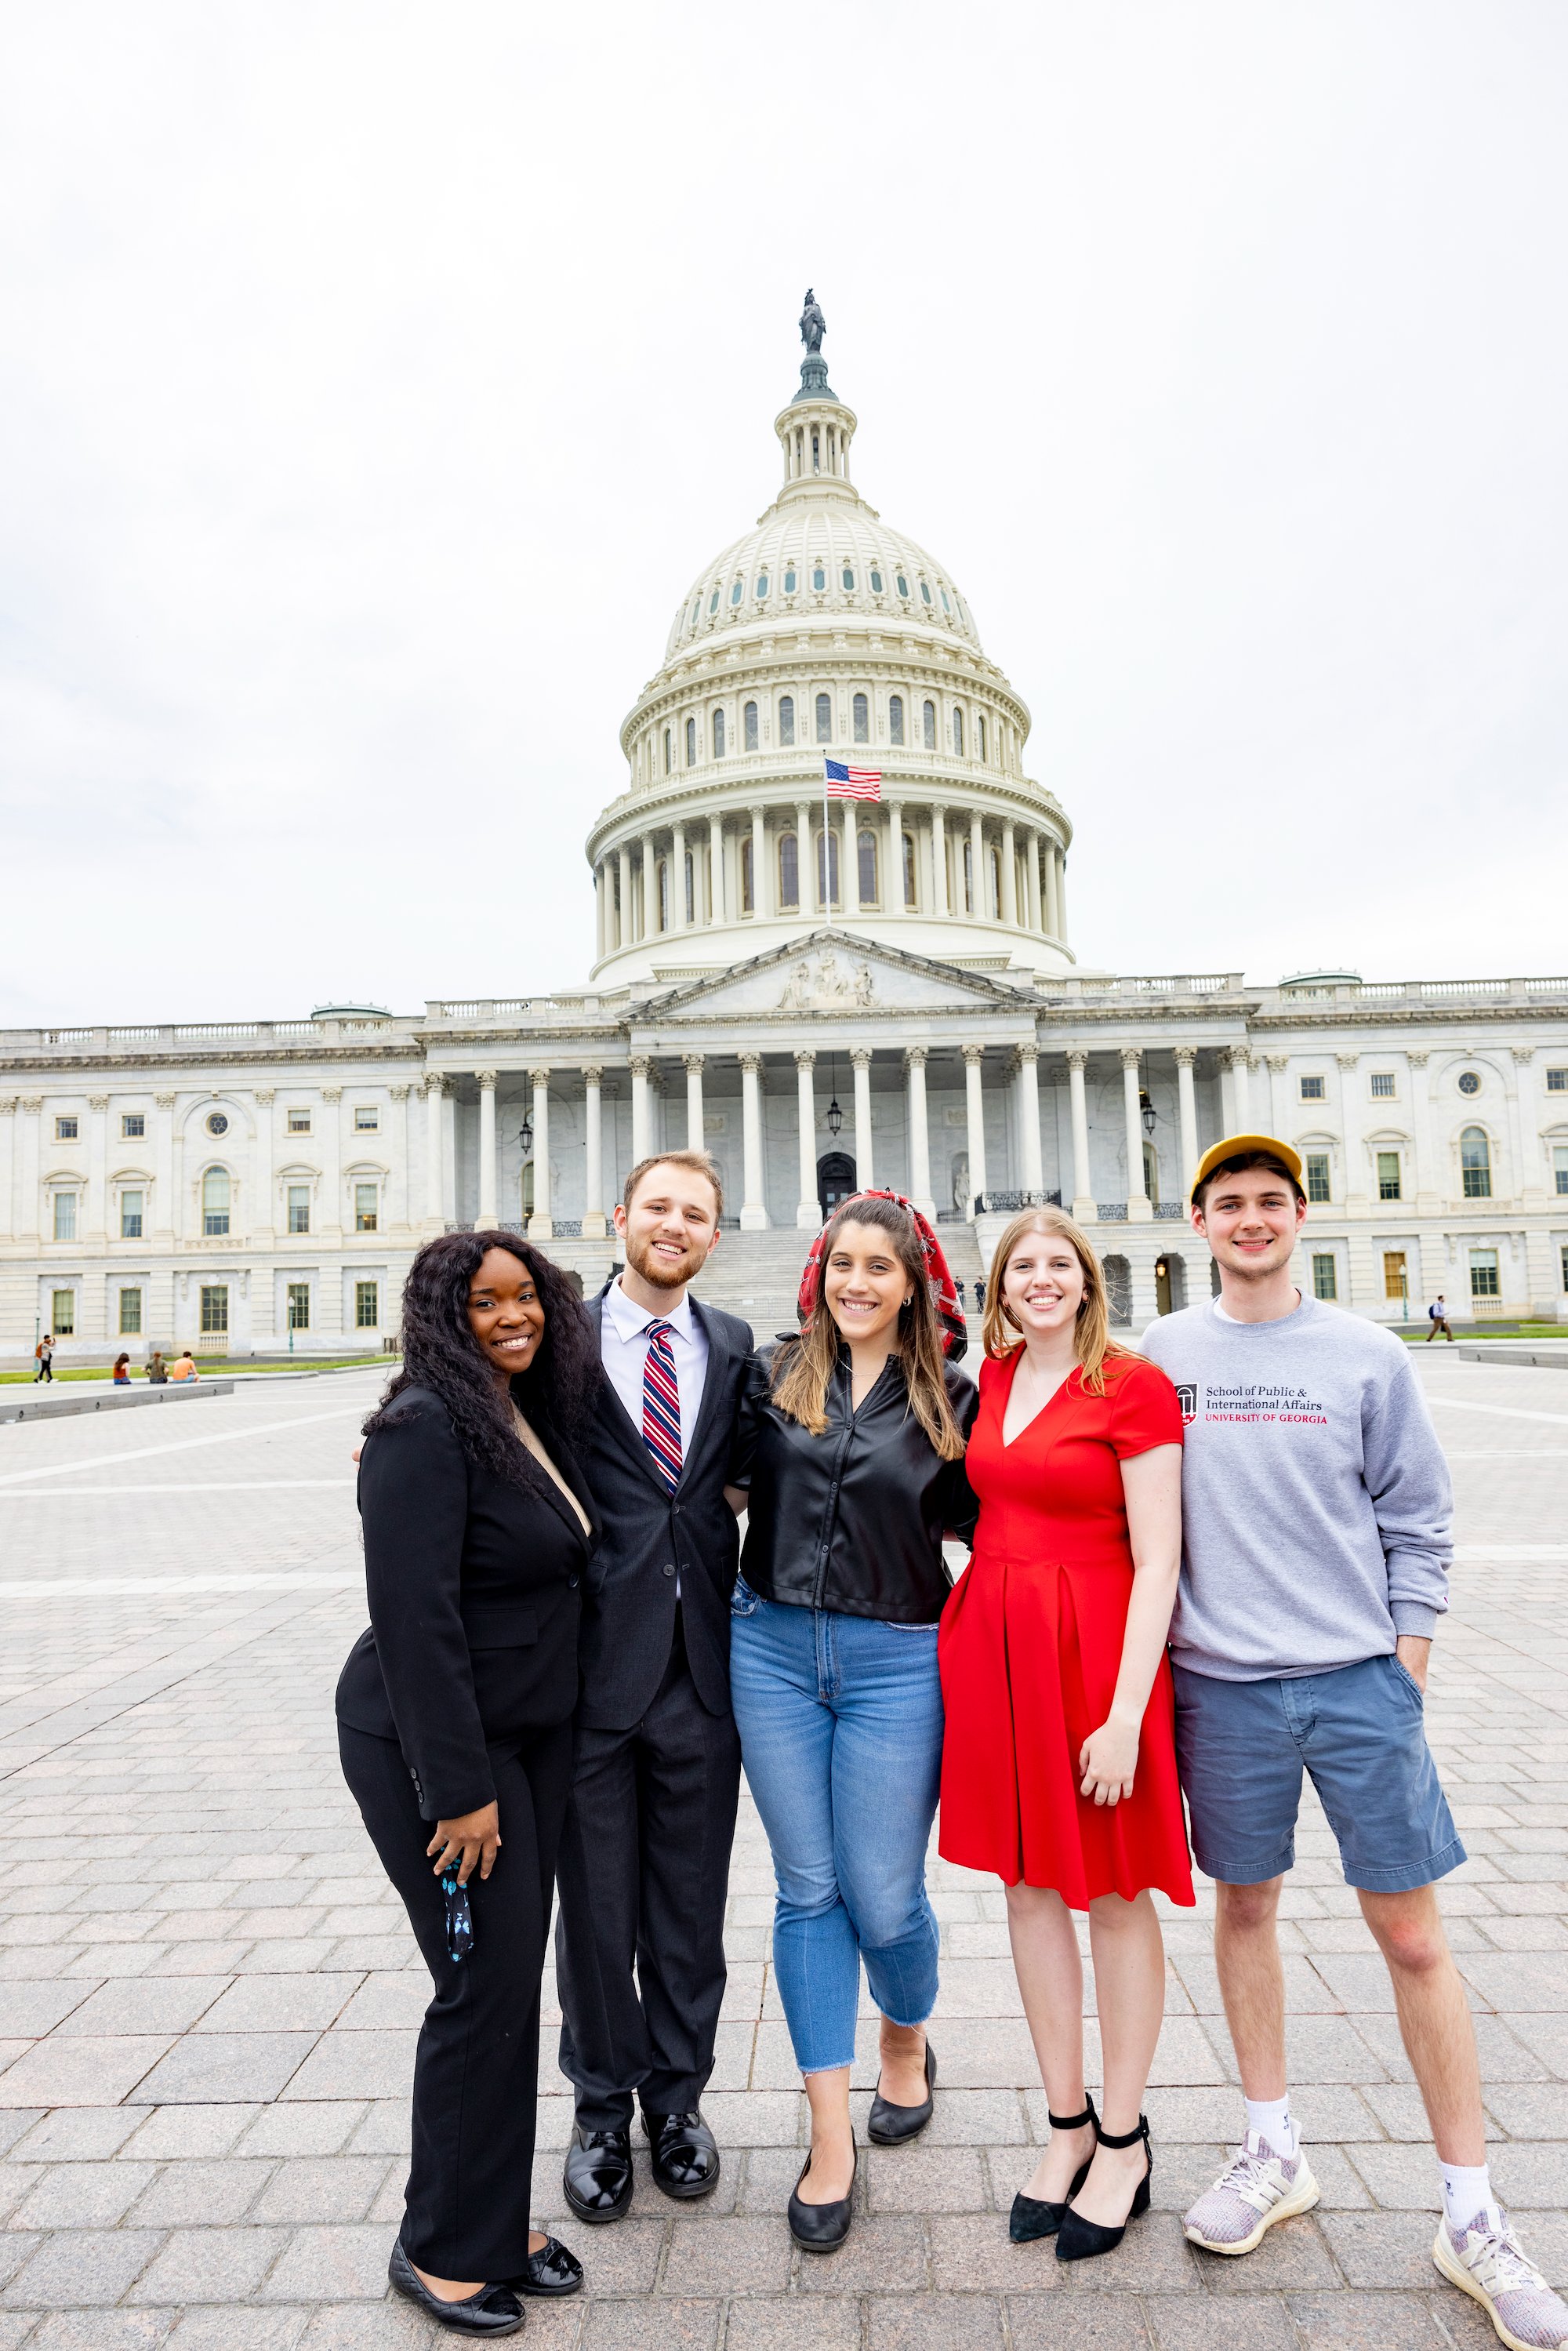 Five UGA students (three female and two male) put their arms around each other and smile toward the camera. Behind them stands the U.S. Capitol.